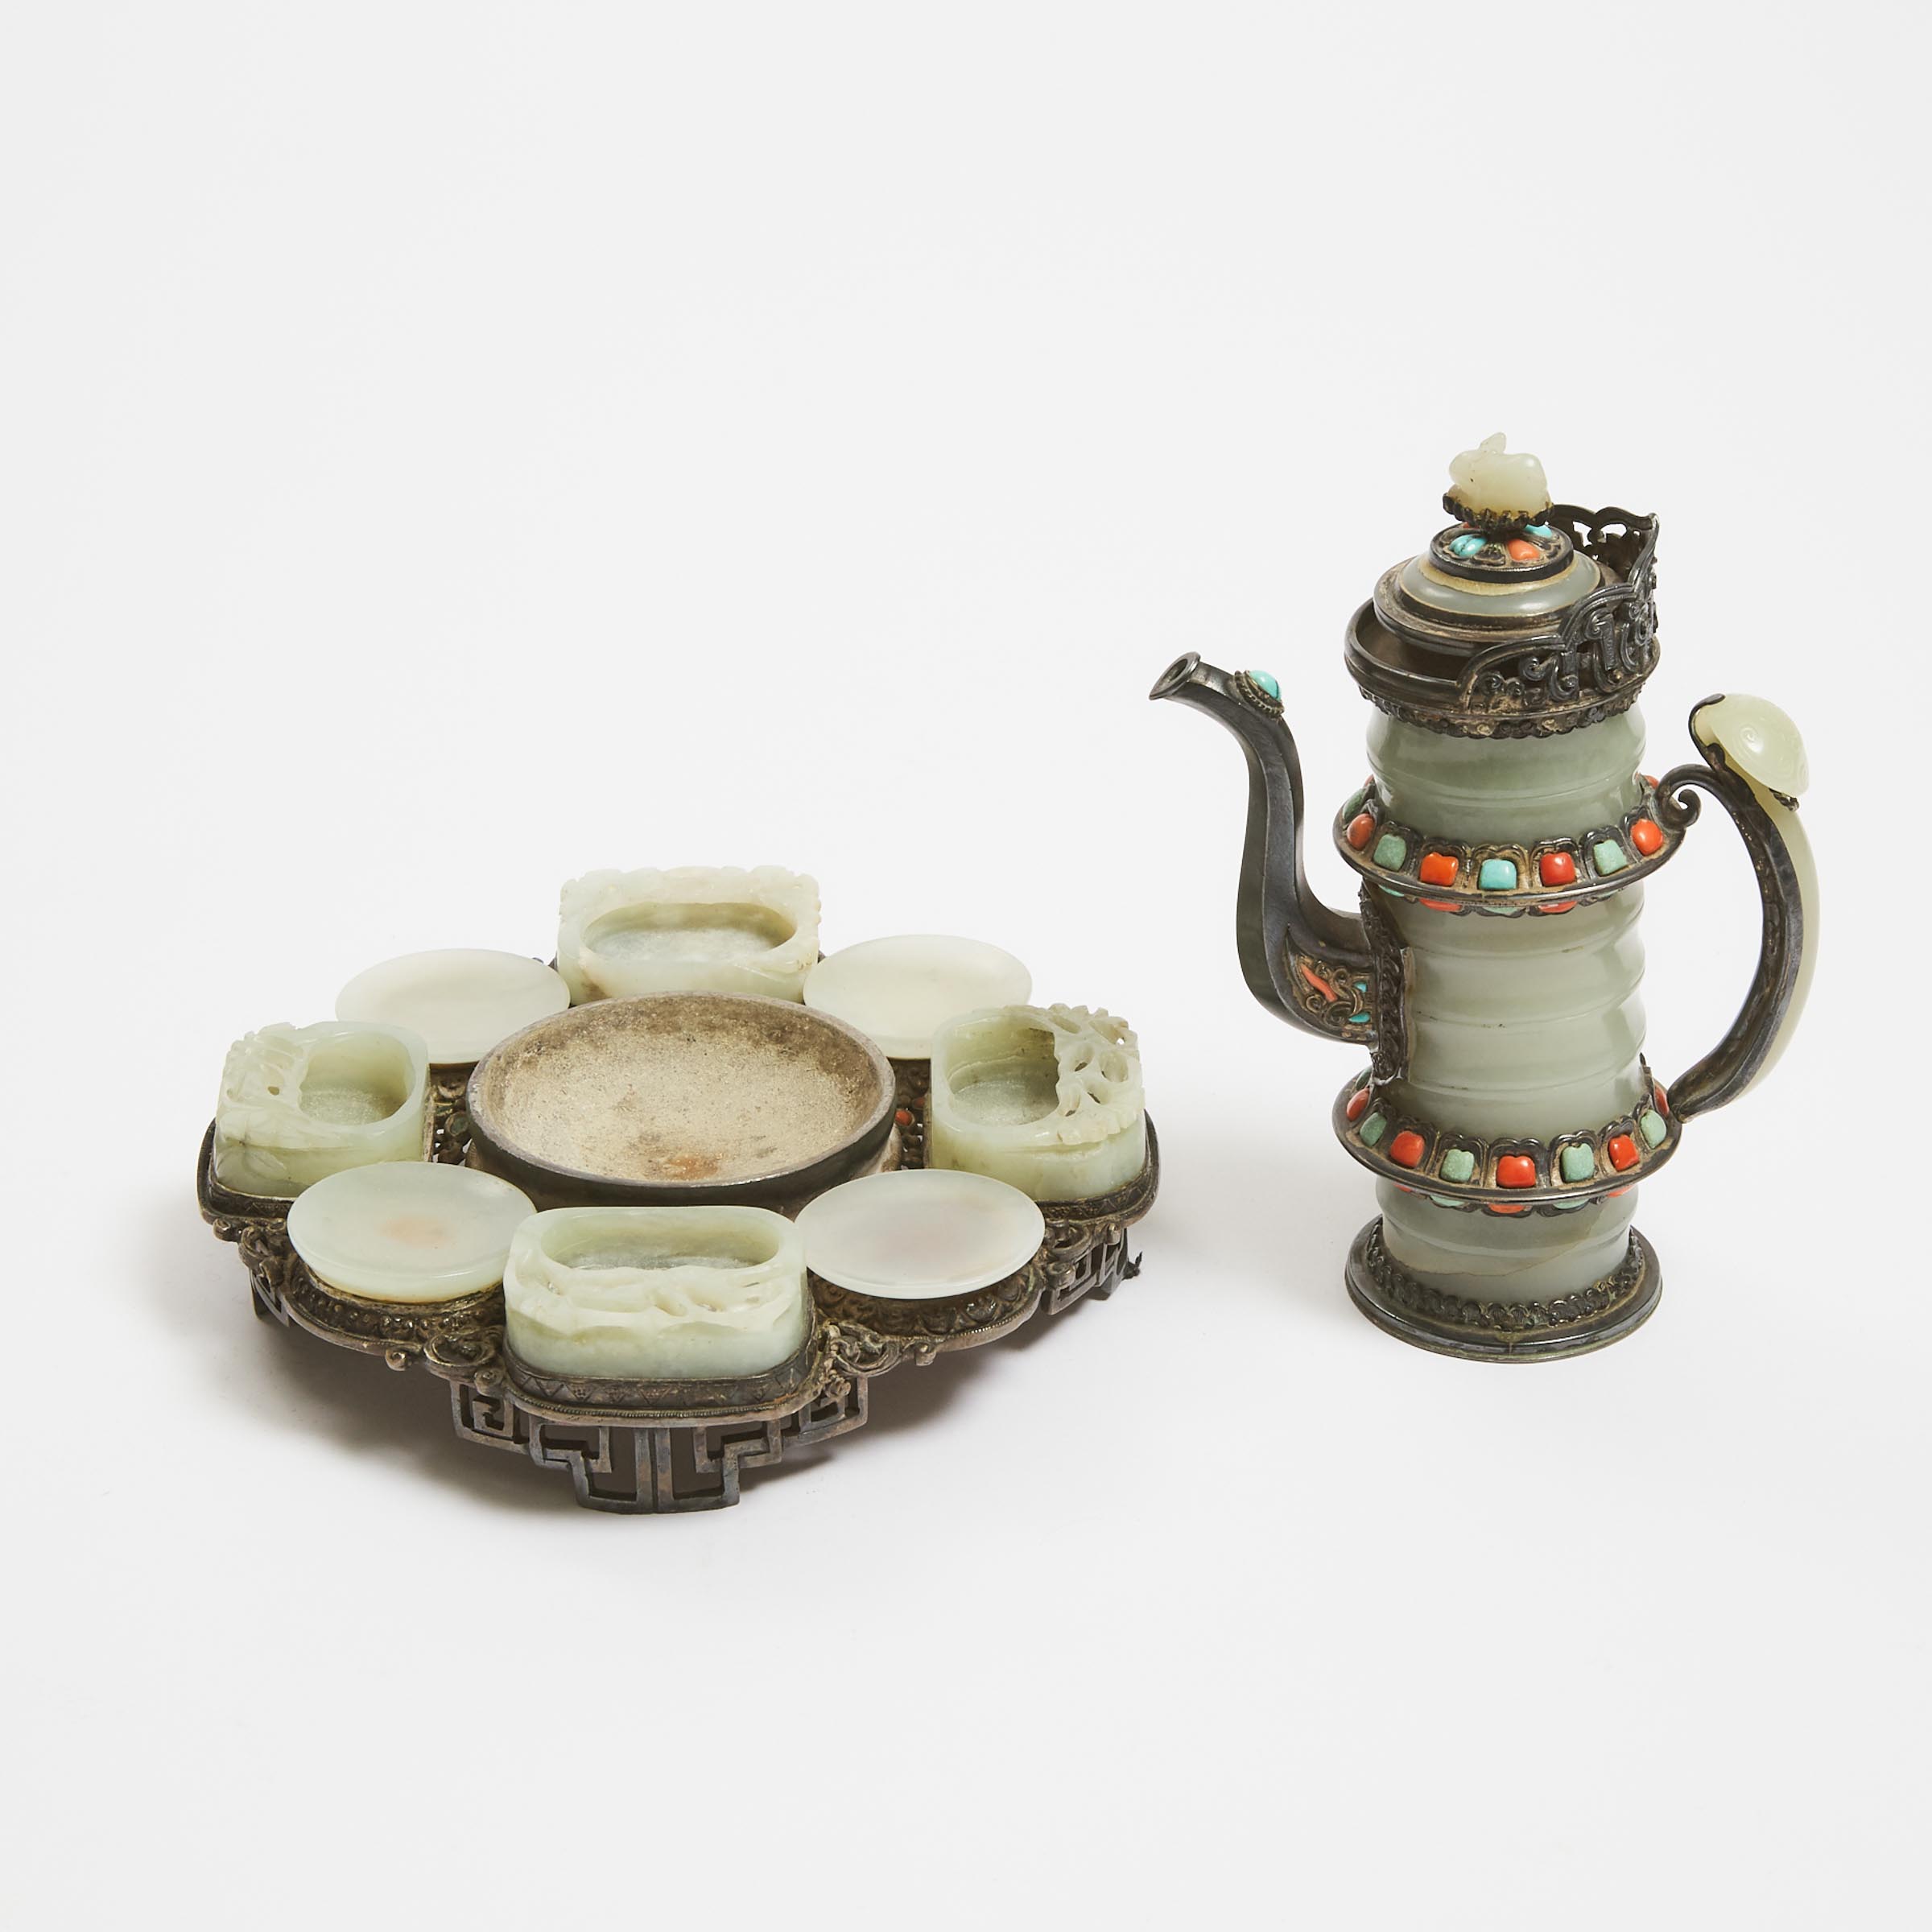 A White Jade Silver-Mounted Teapot, Together With an Ink Palette, Possibly Mongolia, 18th/19th Century